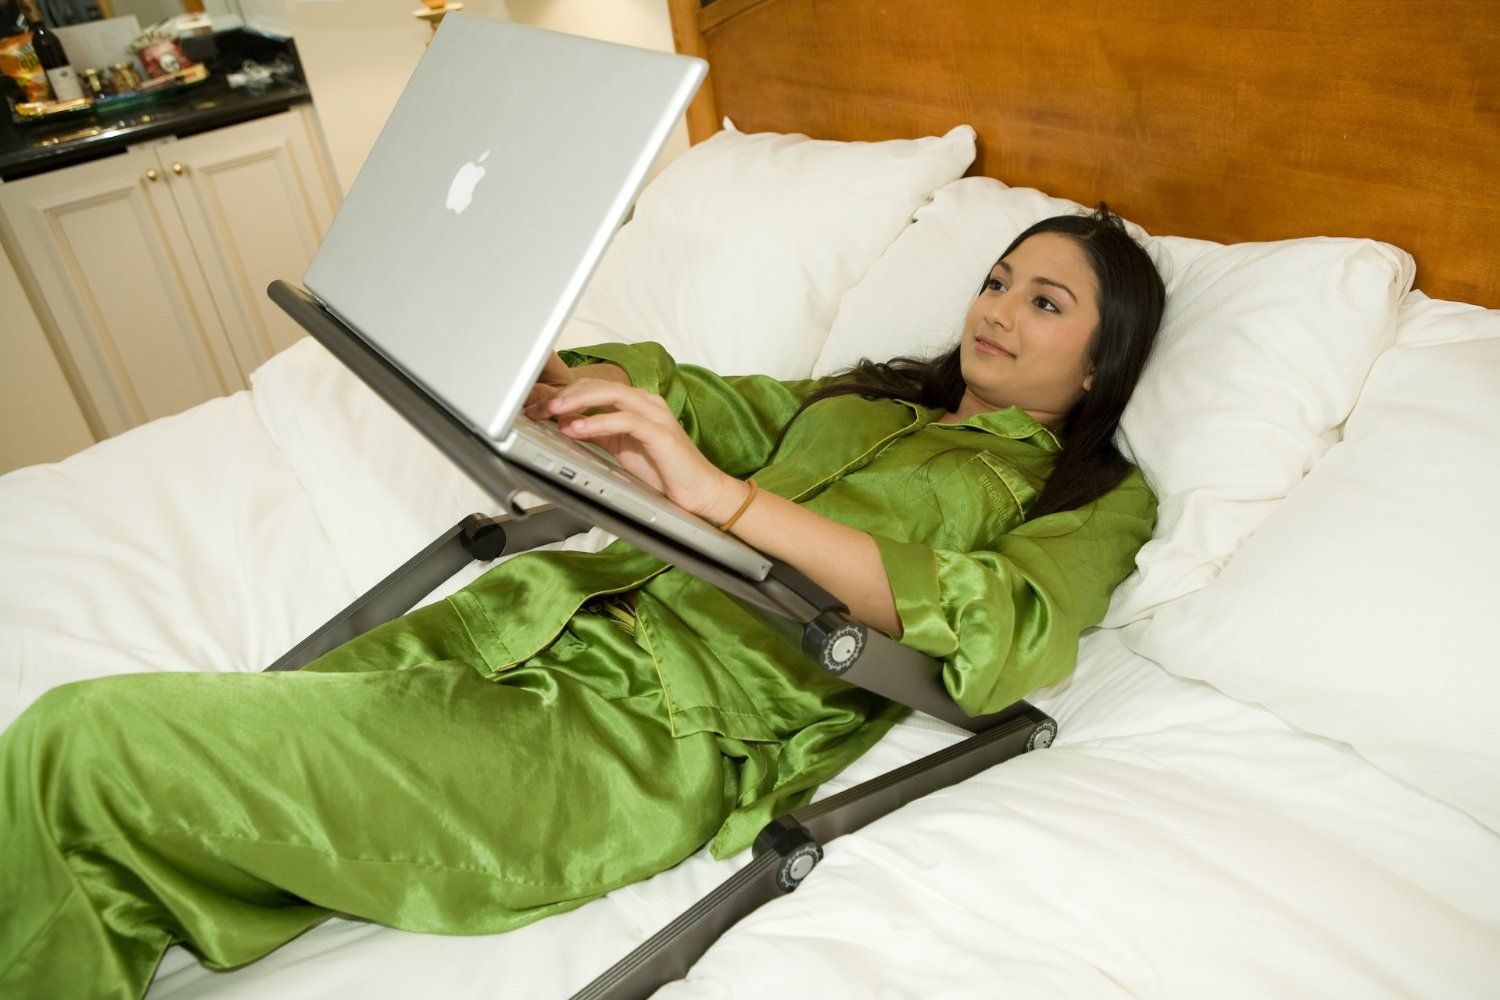 Girl Lying in bed with laptop on stand.